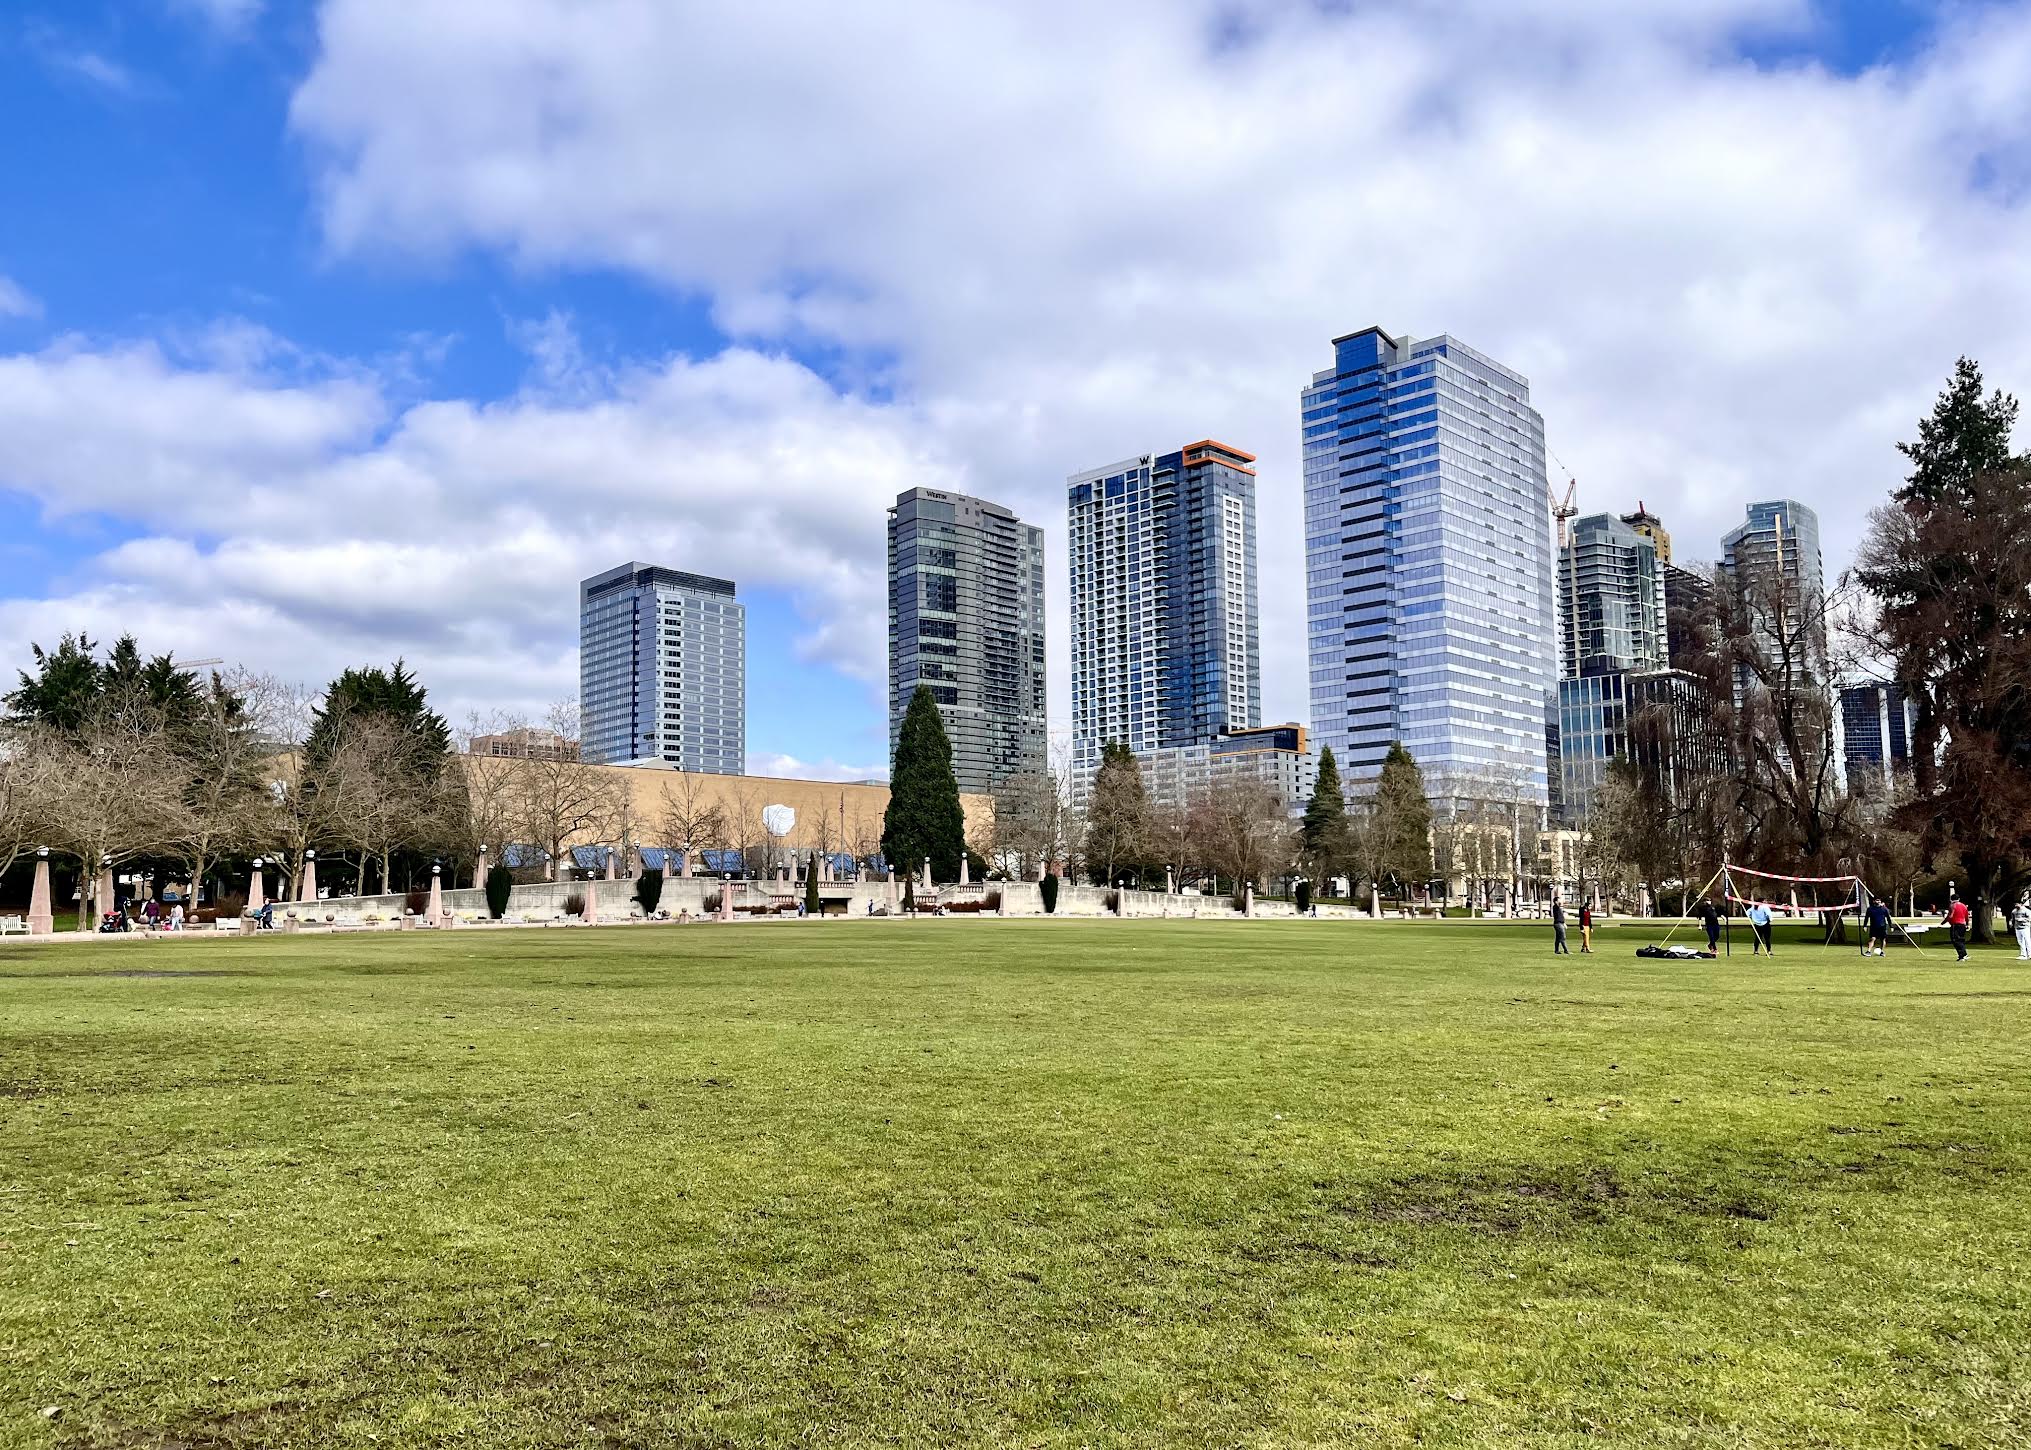 Explore Bellevue at the 2022 Neighborhoods Conference on May 14